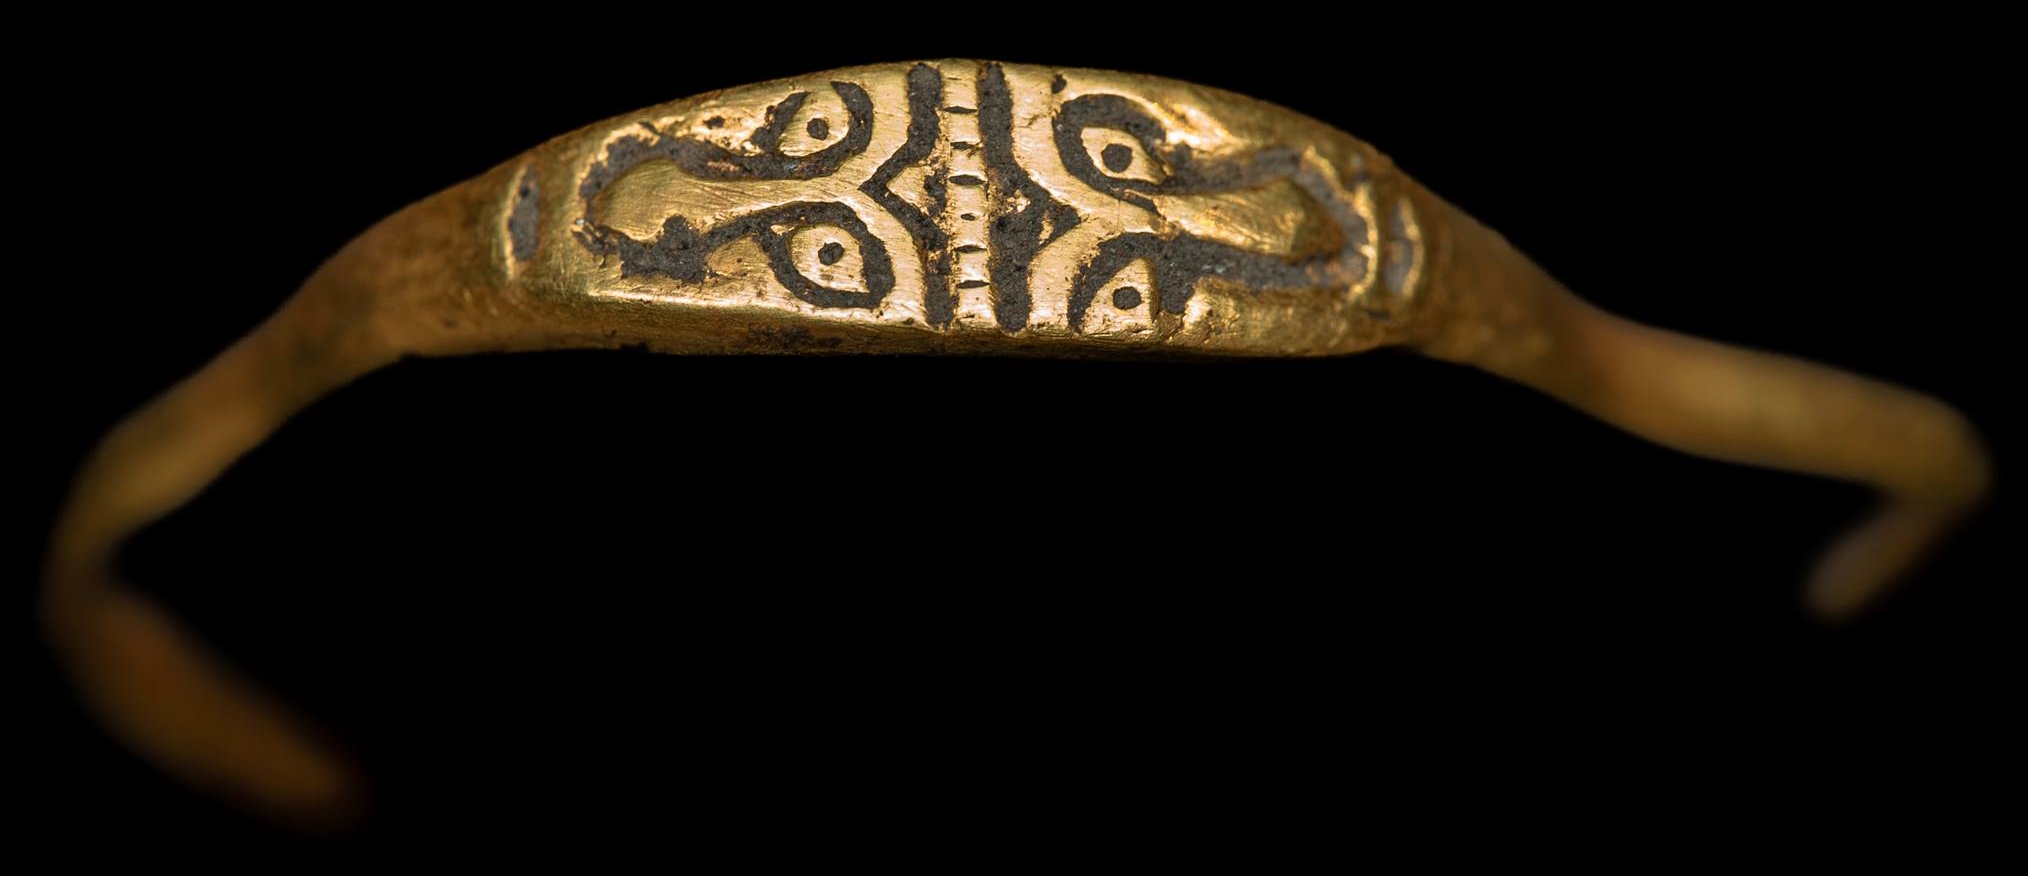 Unique two-faced gold ring found in Kraków